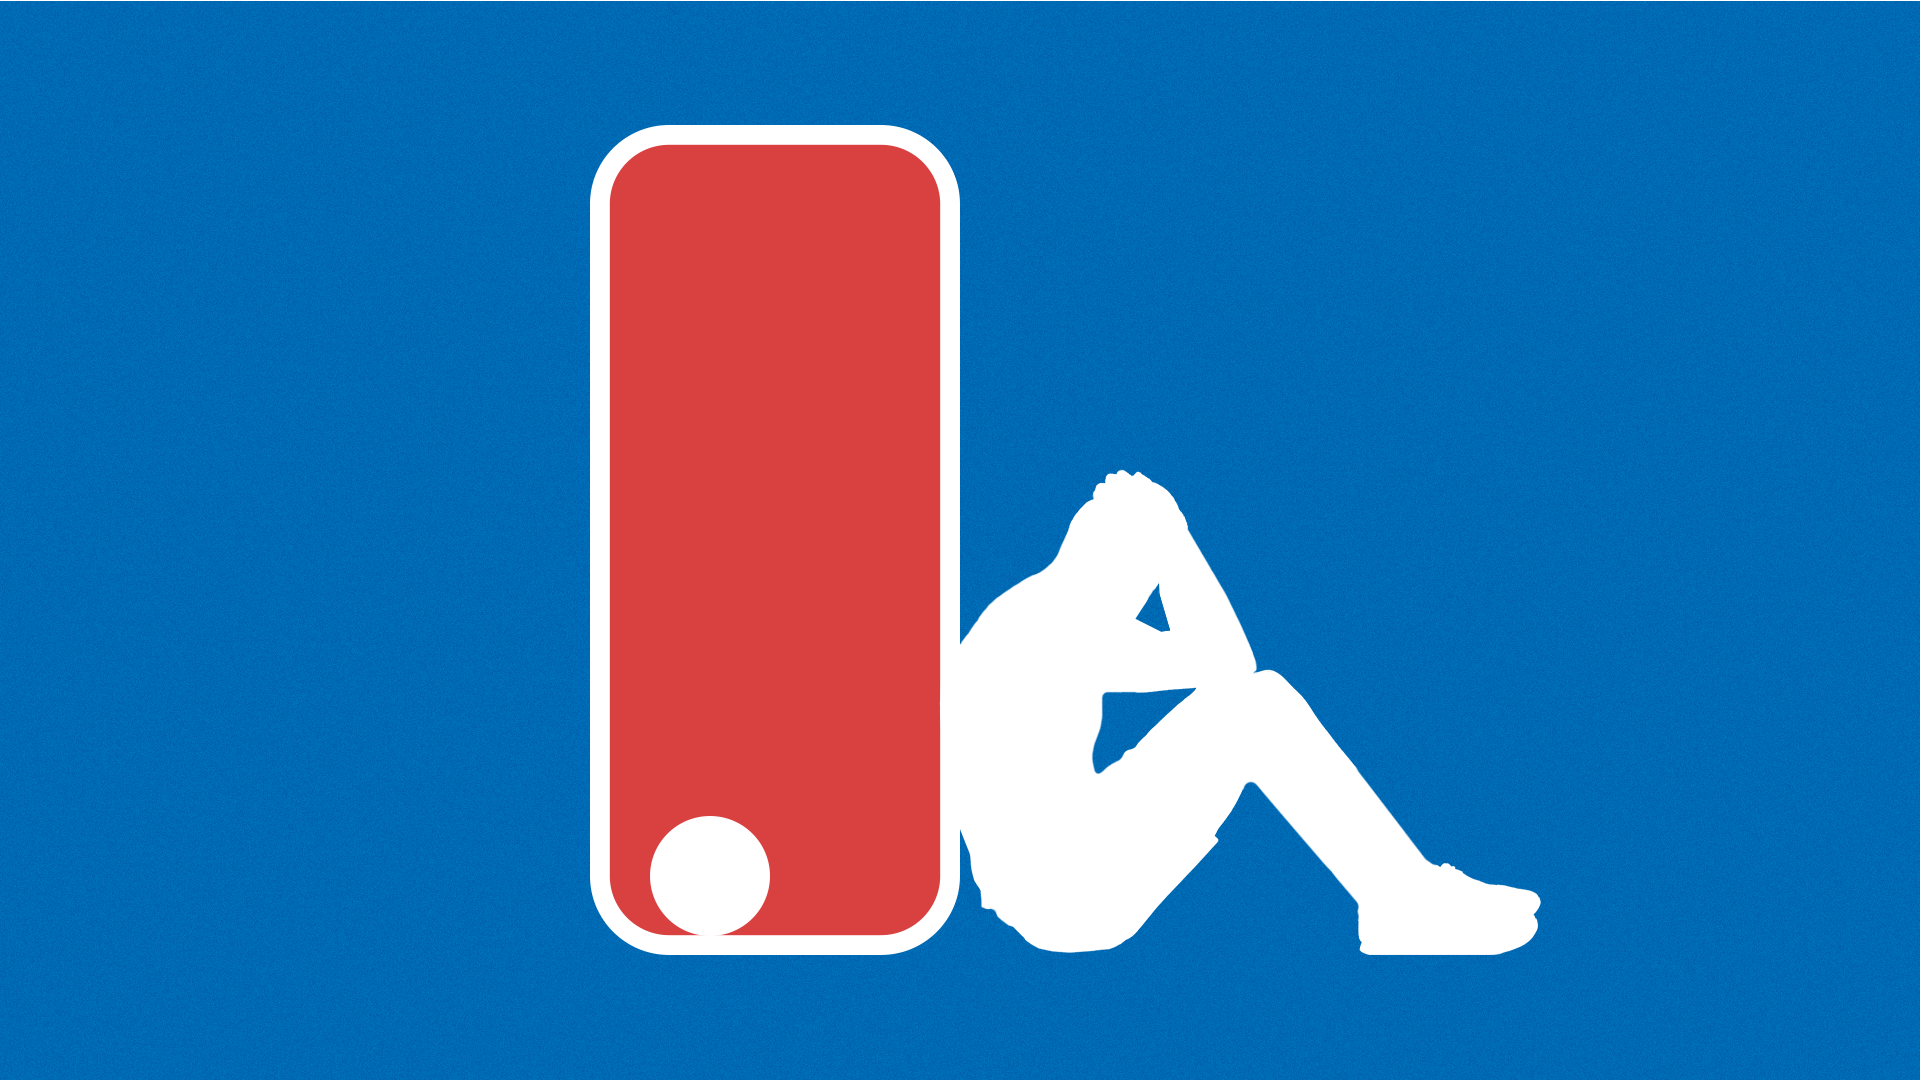 Illustration of the NBA logo with the ball left abandoned and the player sitting and leaning against the outside frame of the logo with his head in his hands. 